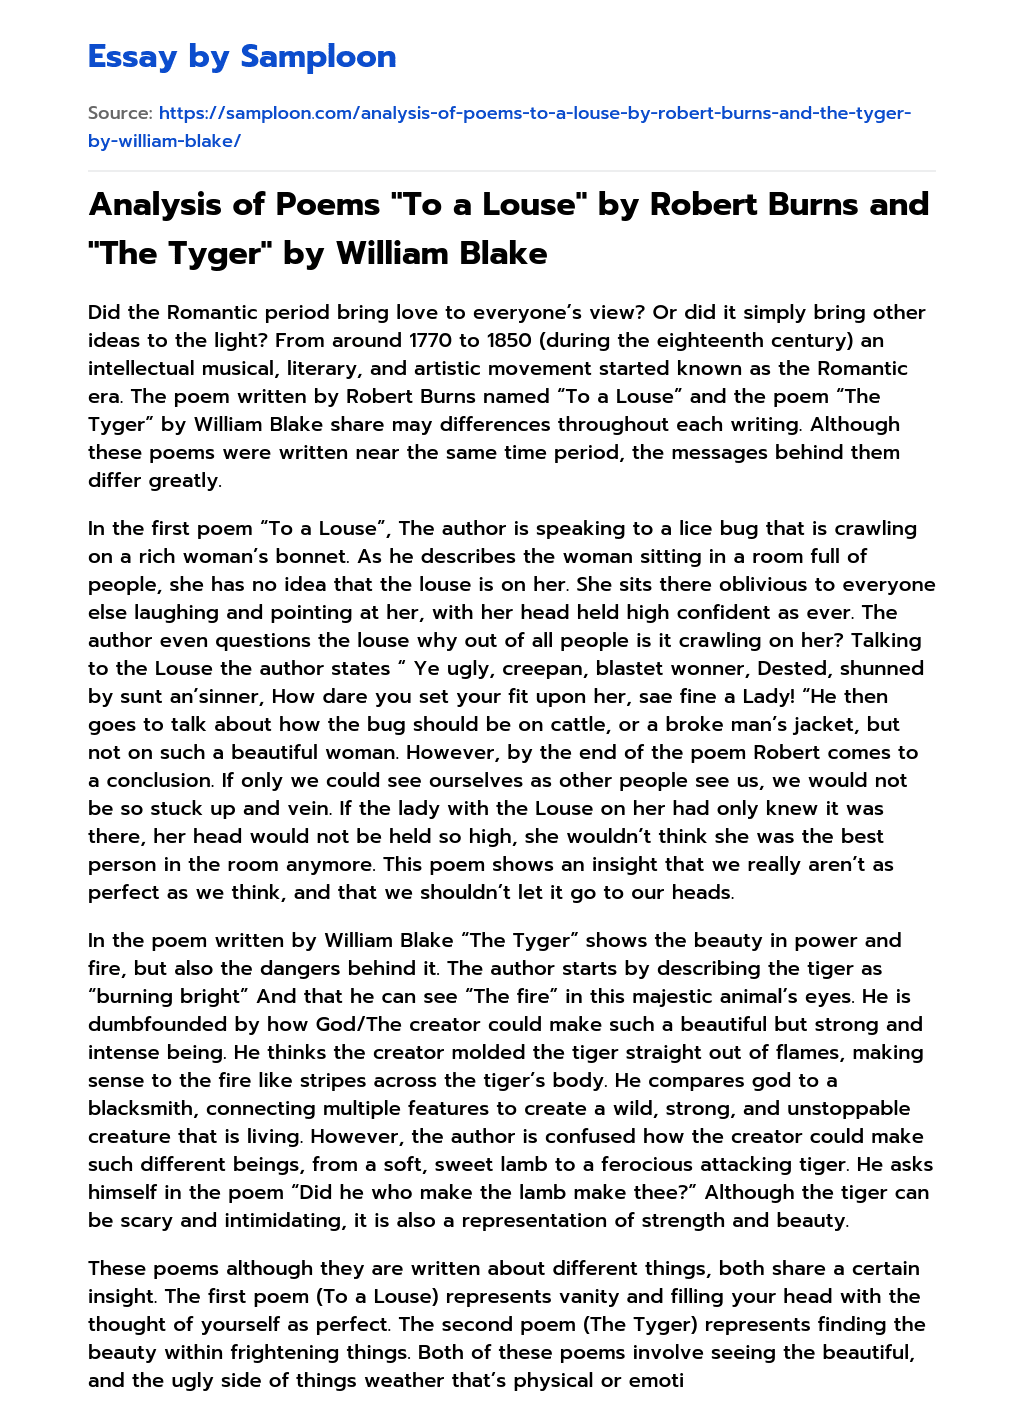 Analysis of Poems “To a Louse” by Robert Burns and “The Tyger” by William Blake essay